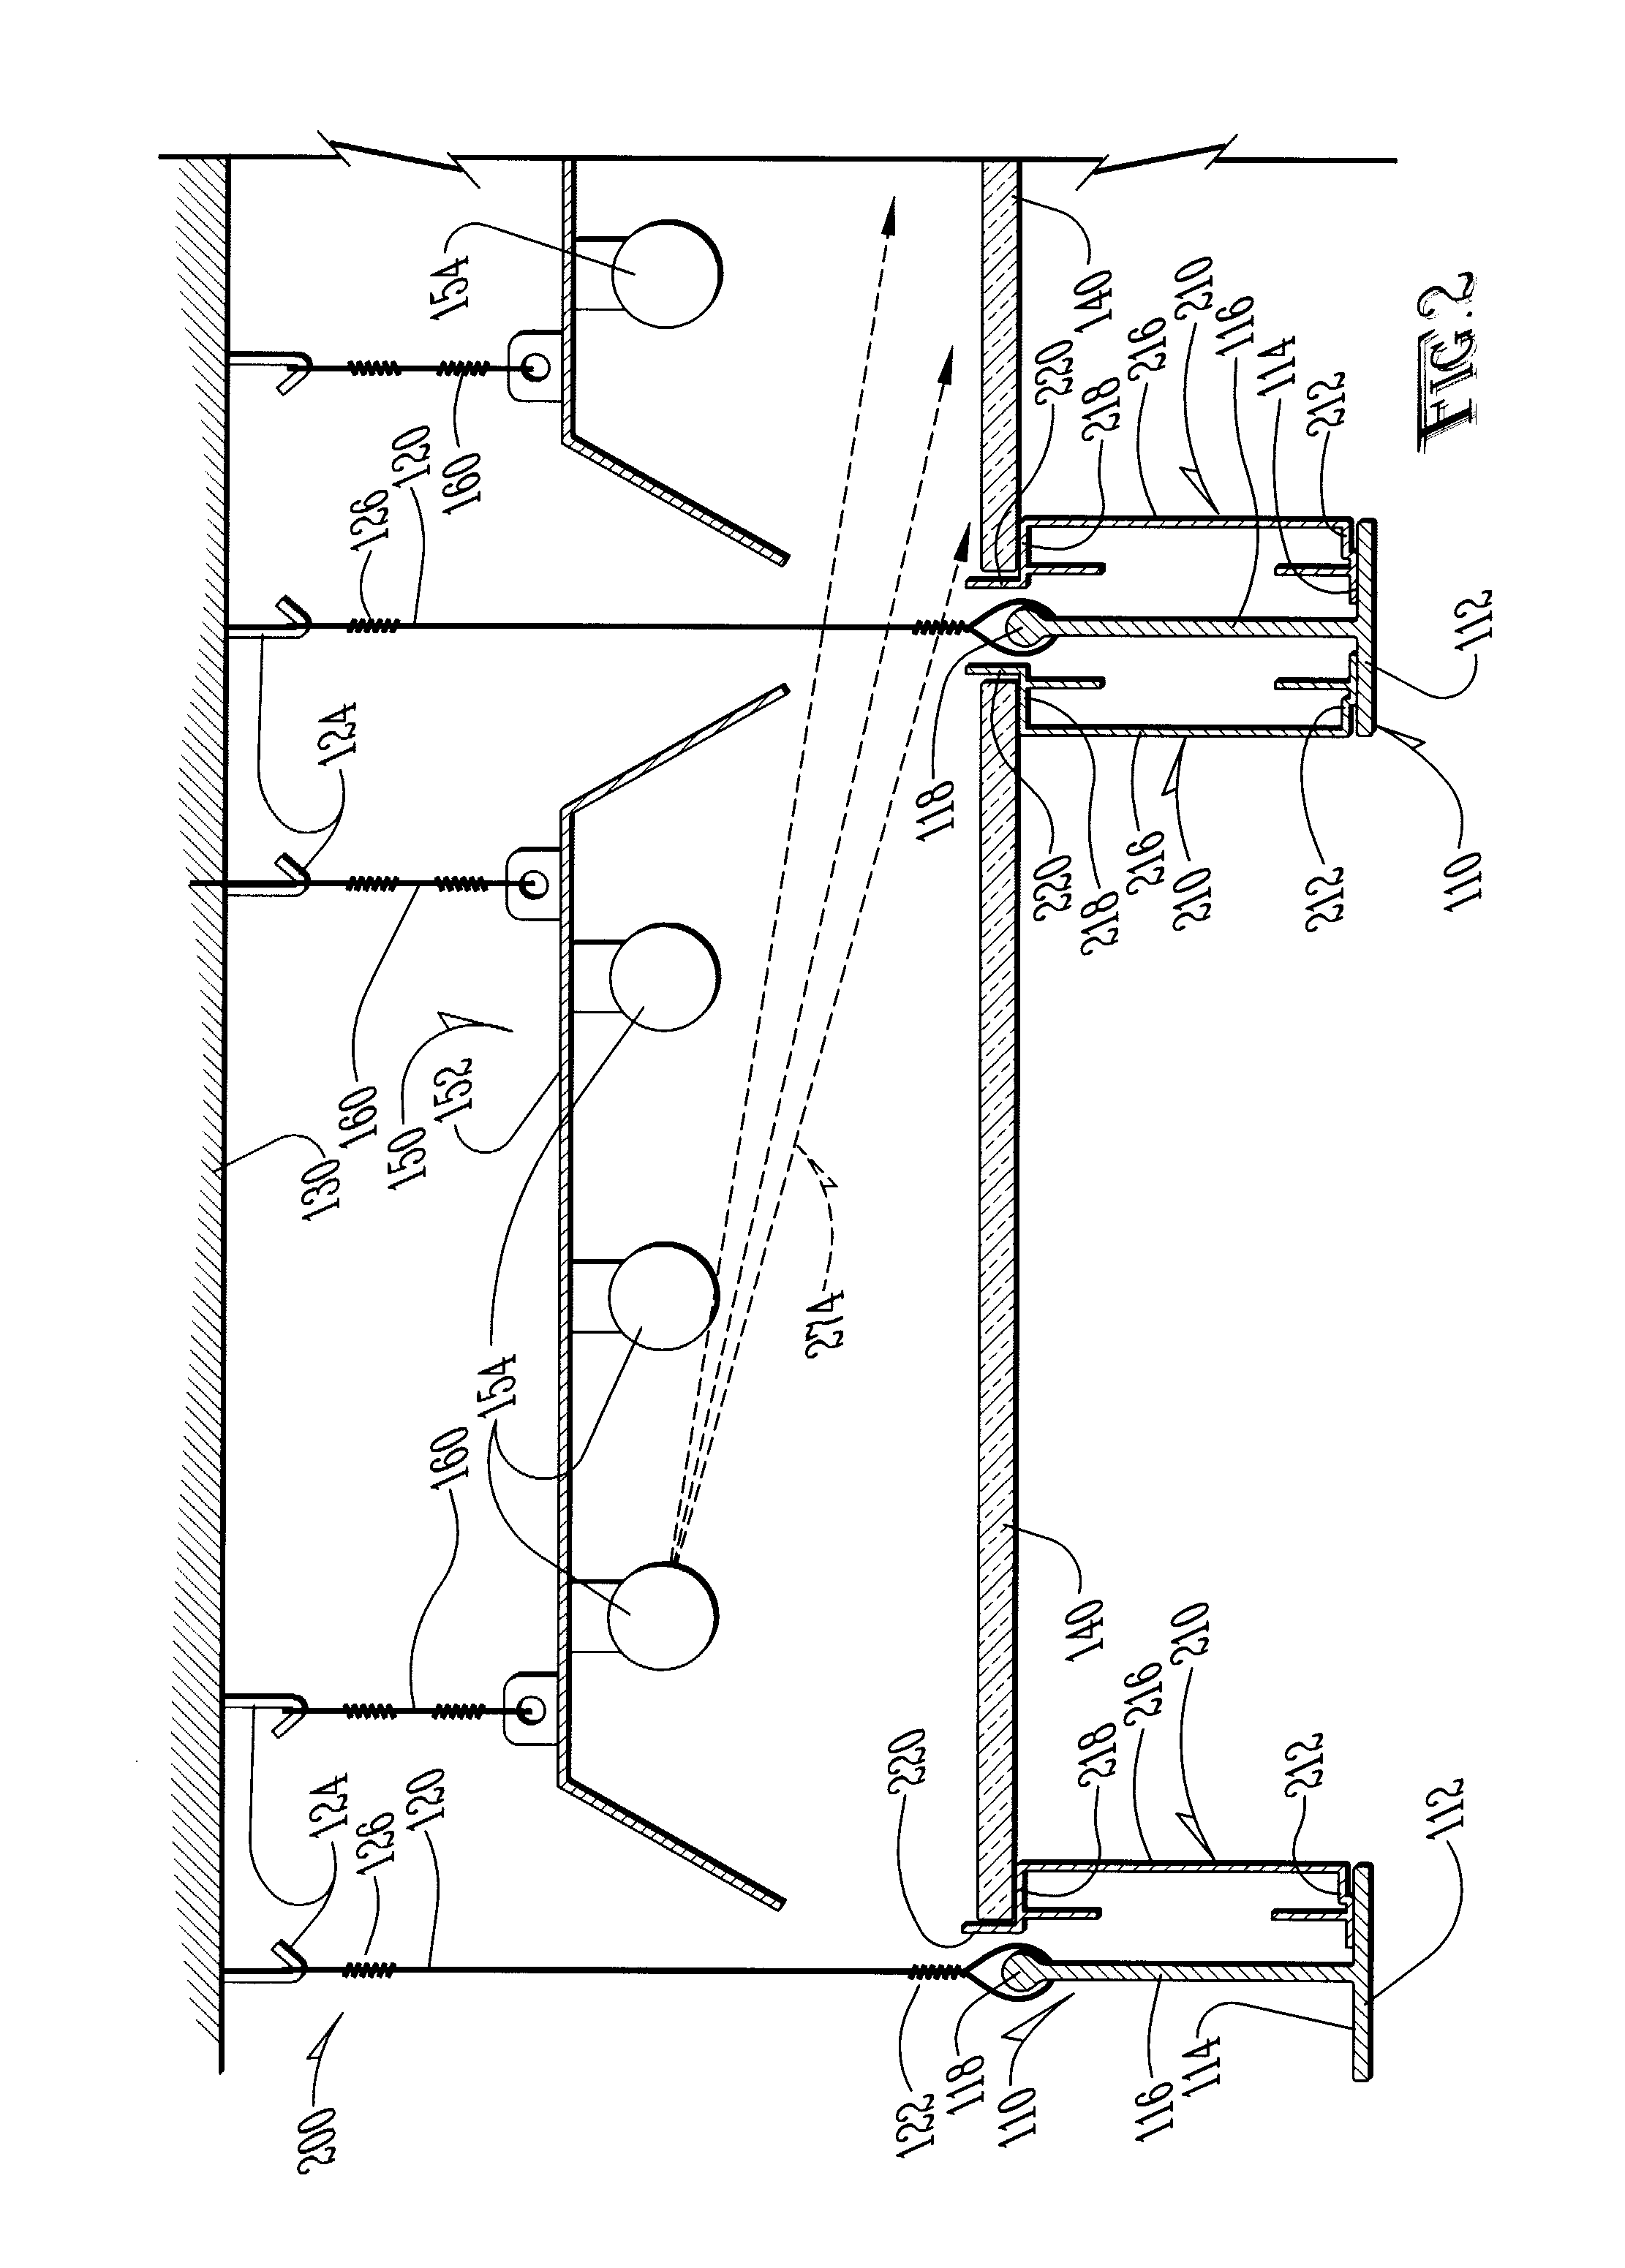 Method and system for creating an illusion of a skylight